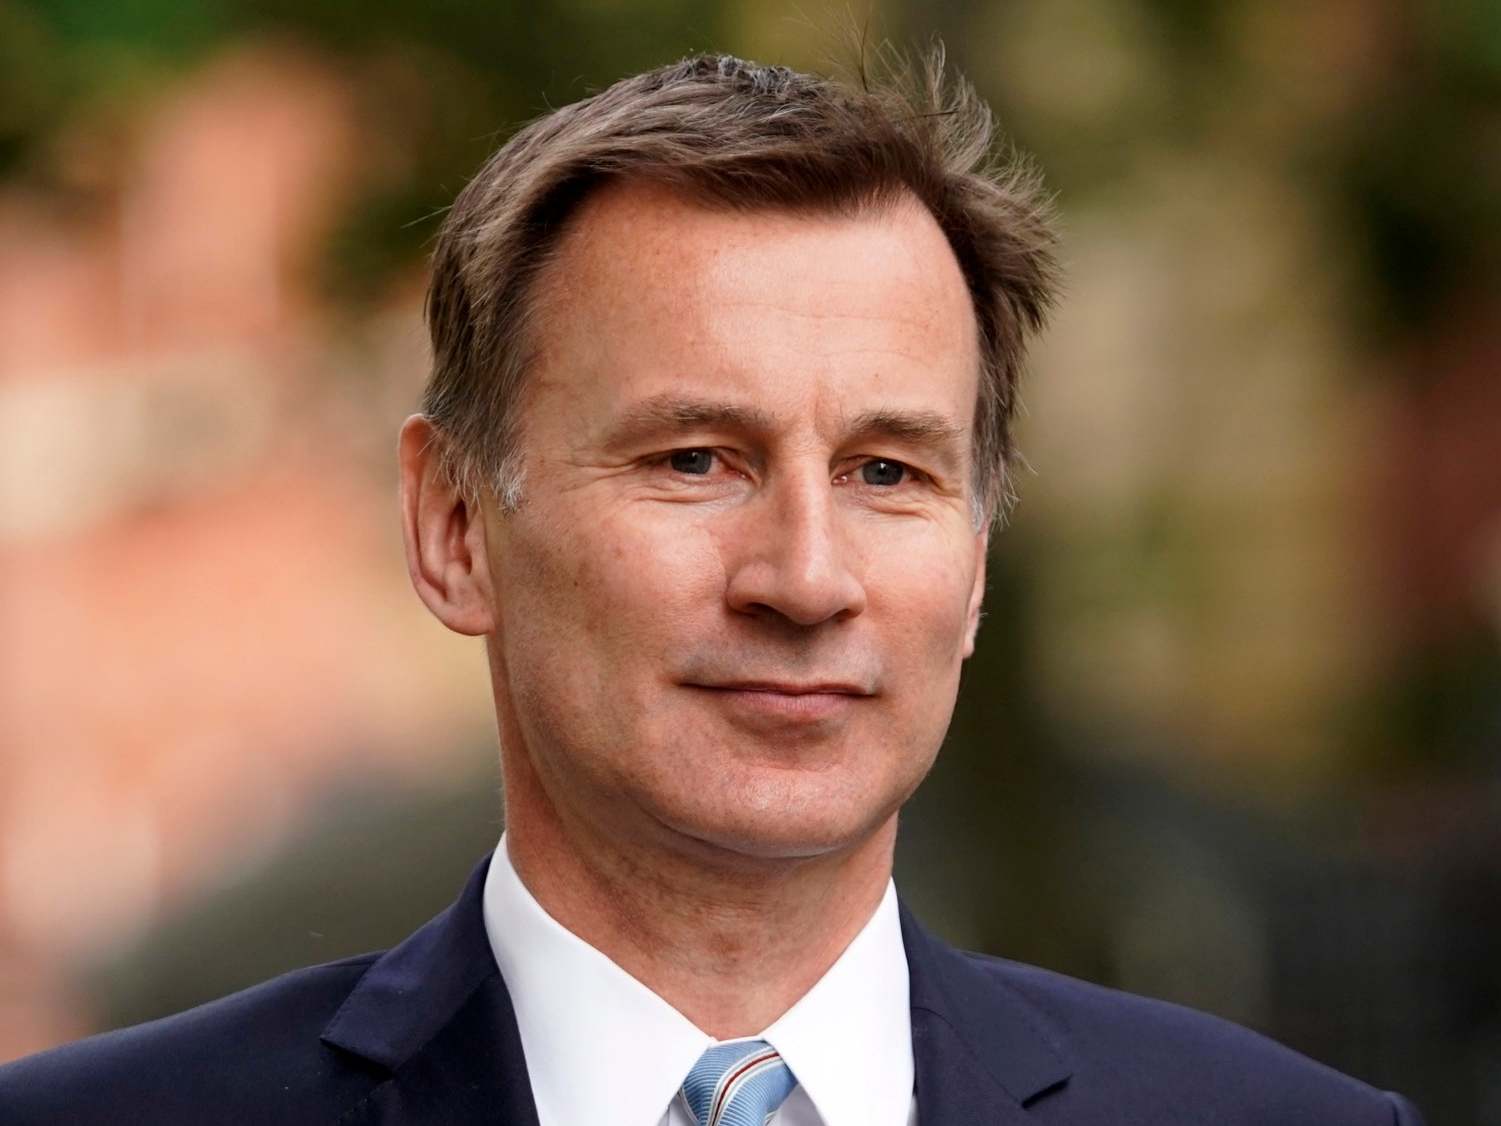 Hunt: I will criticise the government when I don’t believe they’re delivering on their commitments, and I will praise them when I think they are